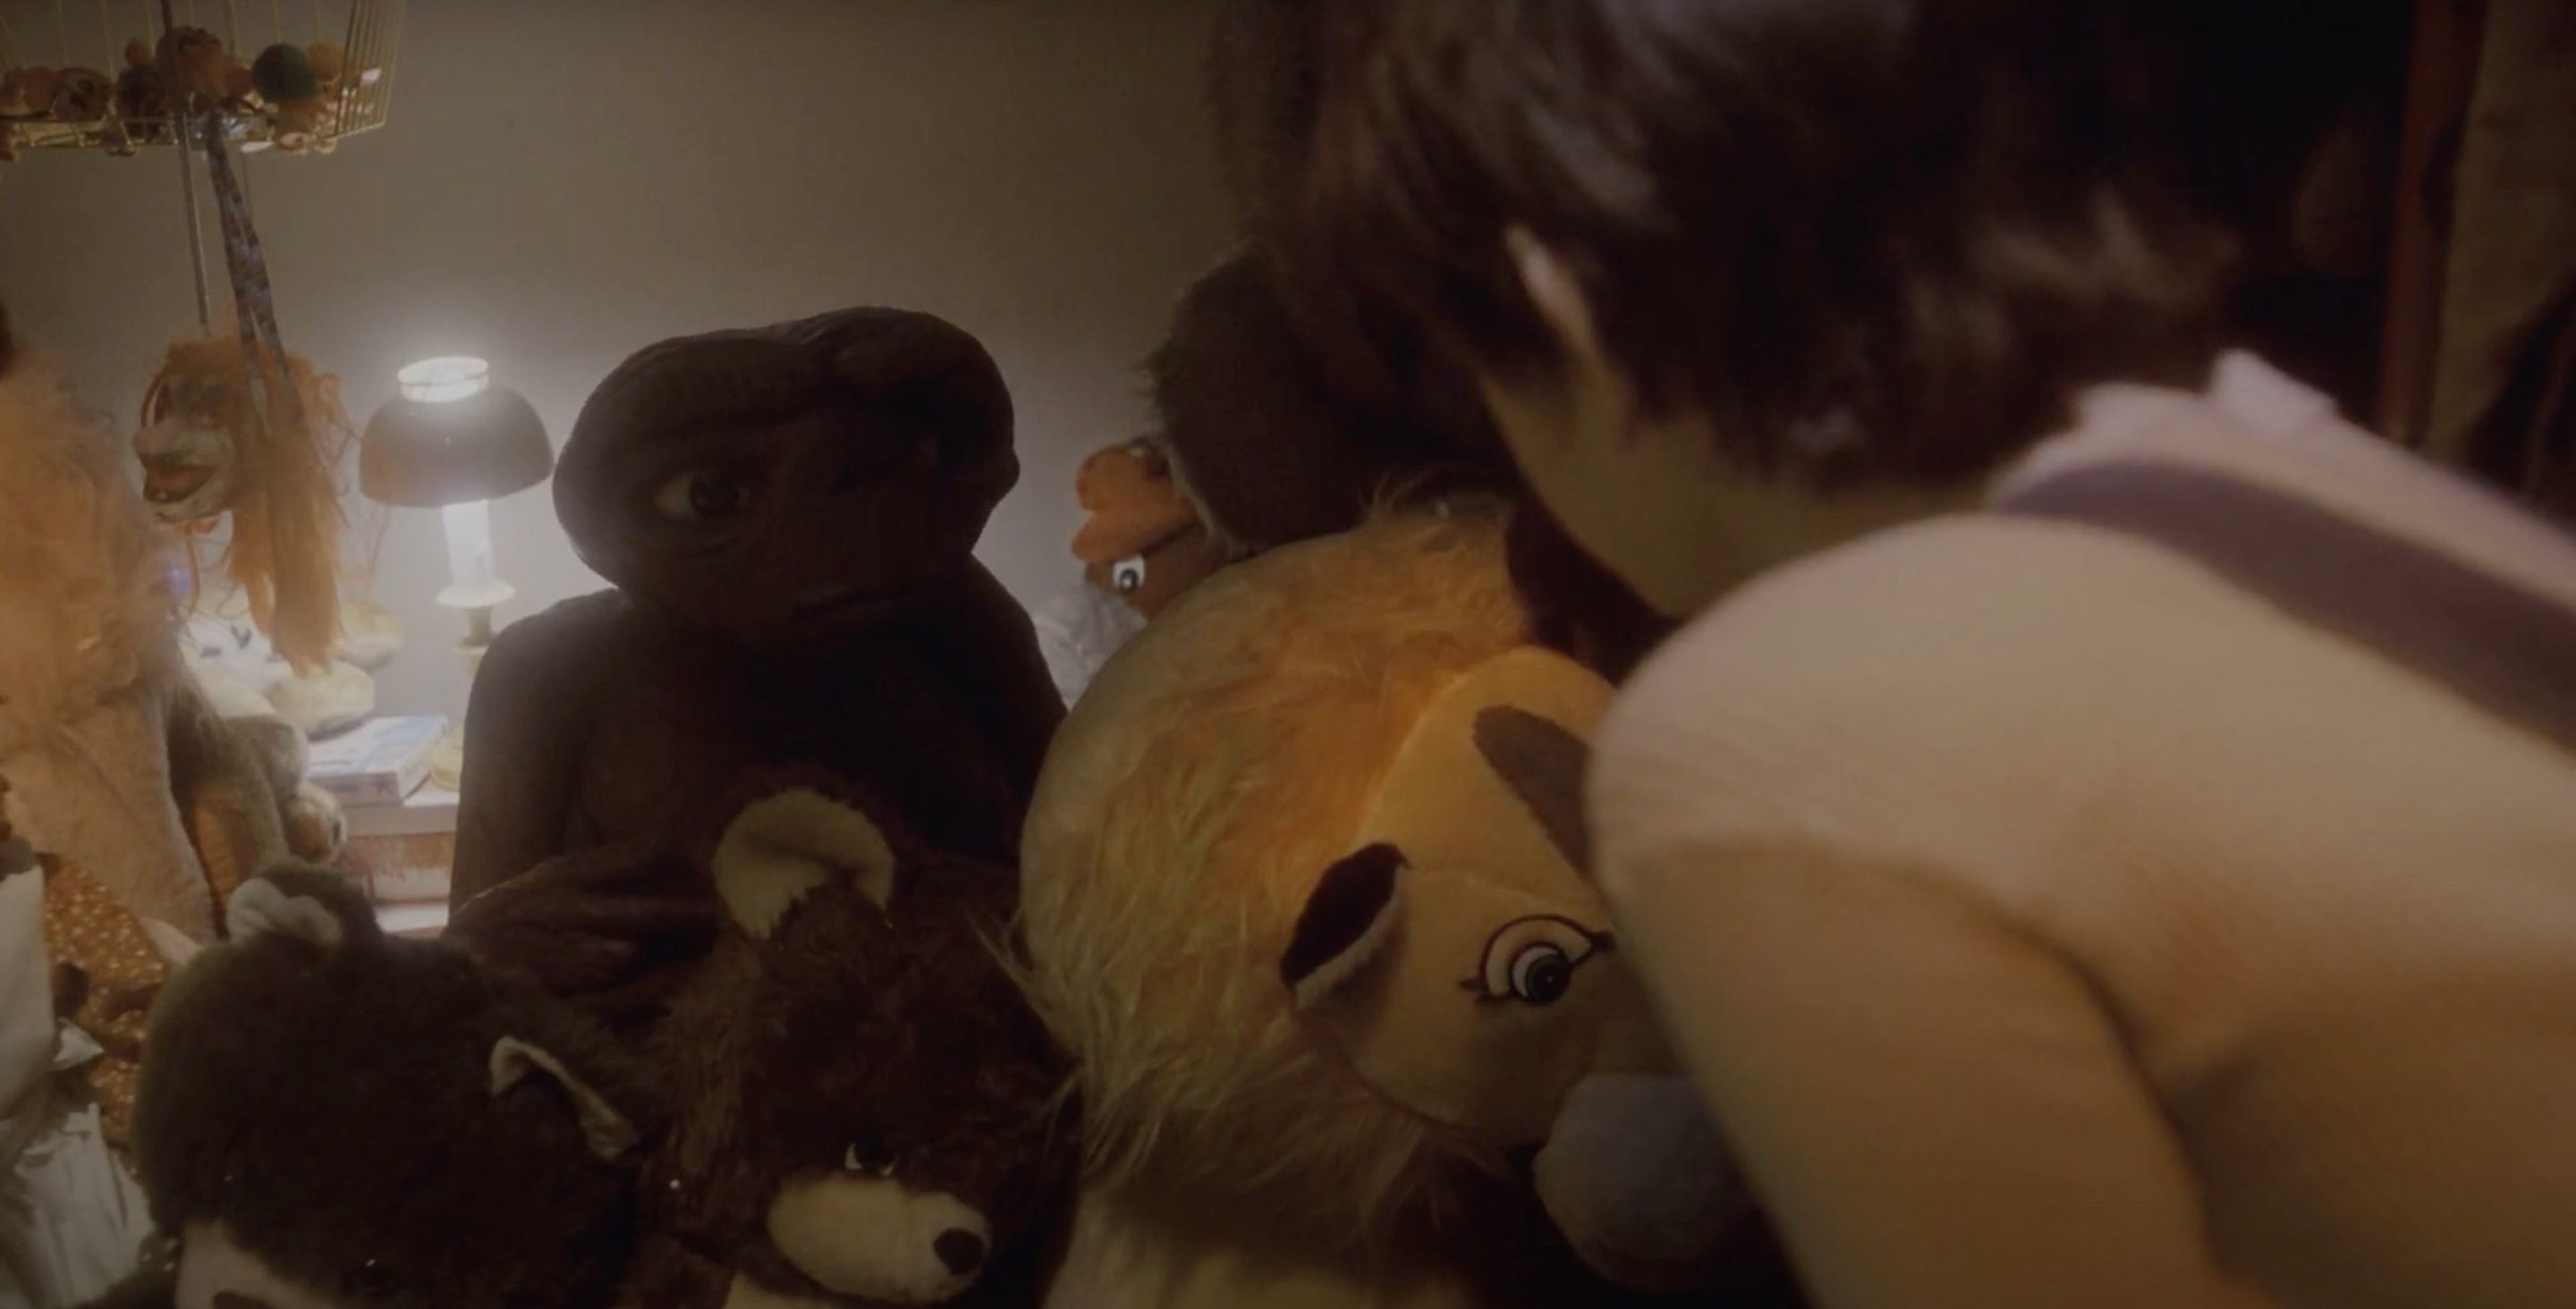 Camera shot of behind Elliott who's looking at E.T. who's sitting near stuffed animals.